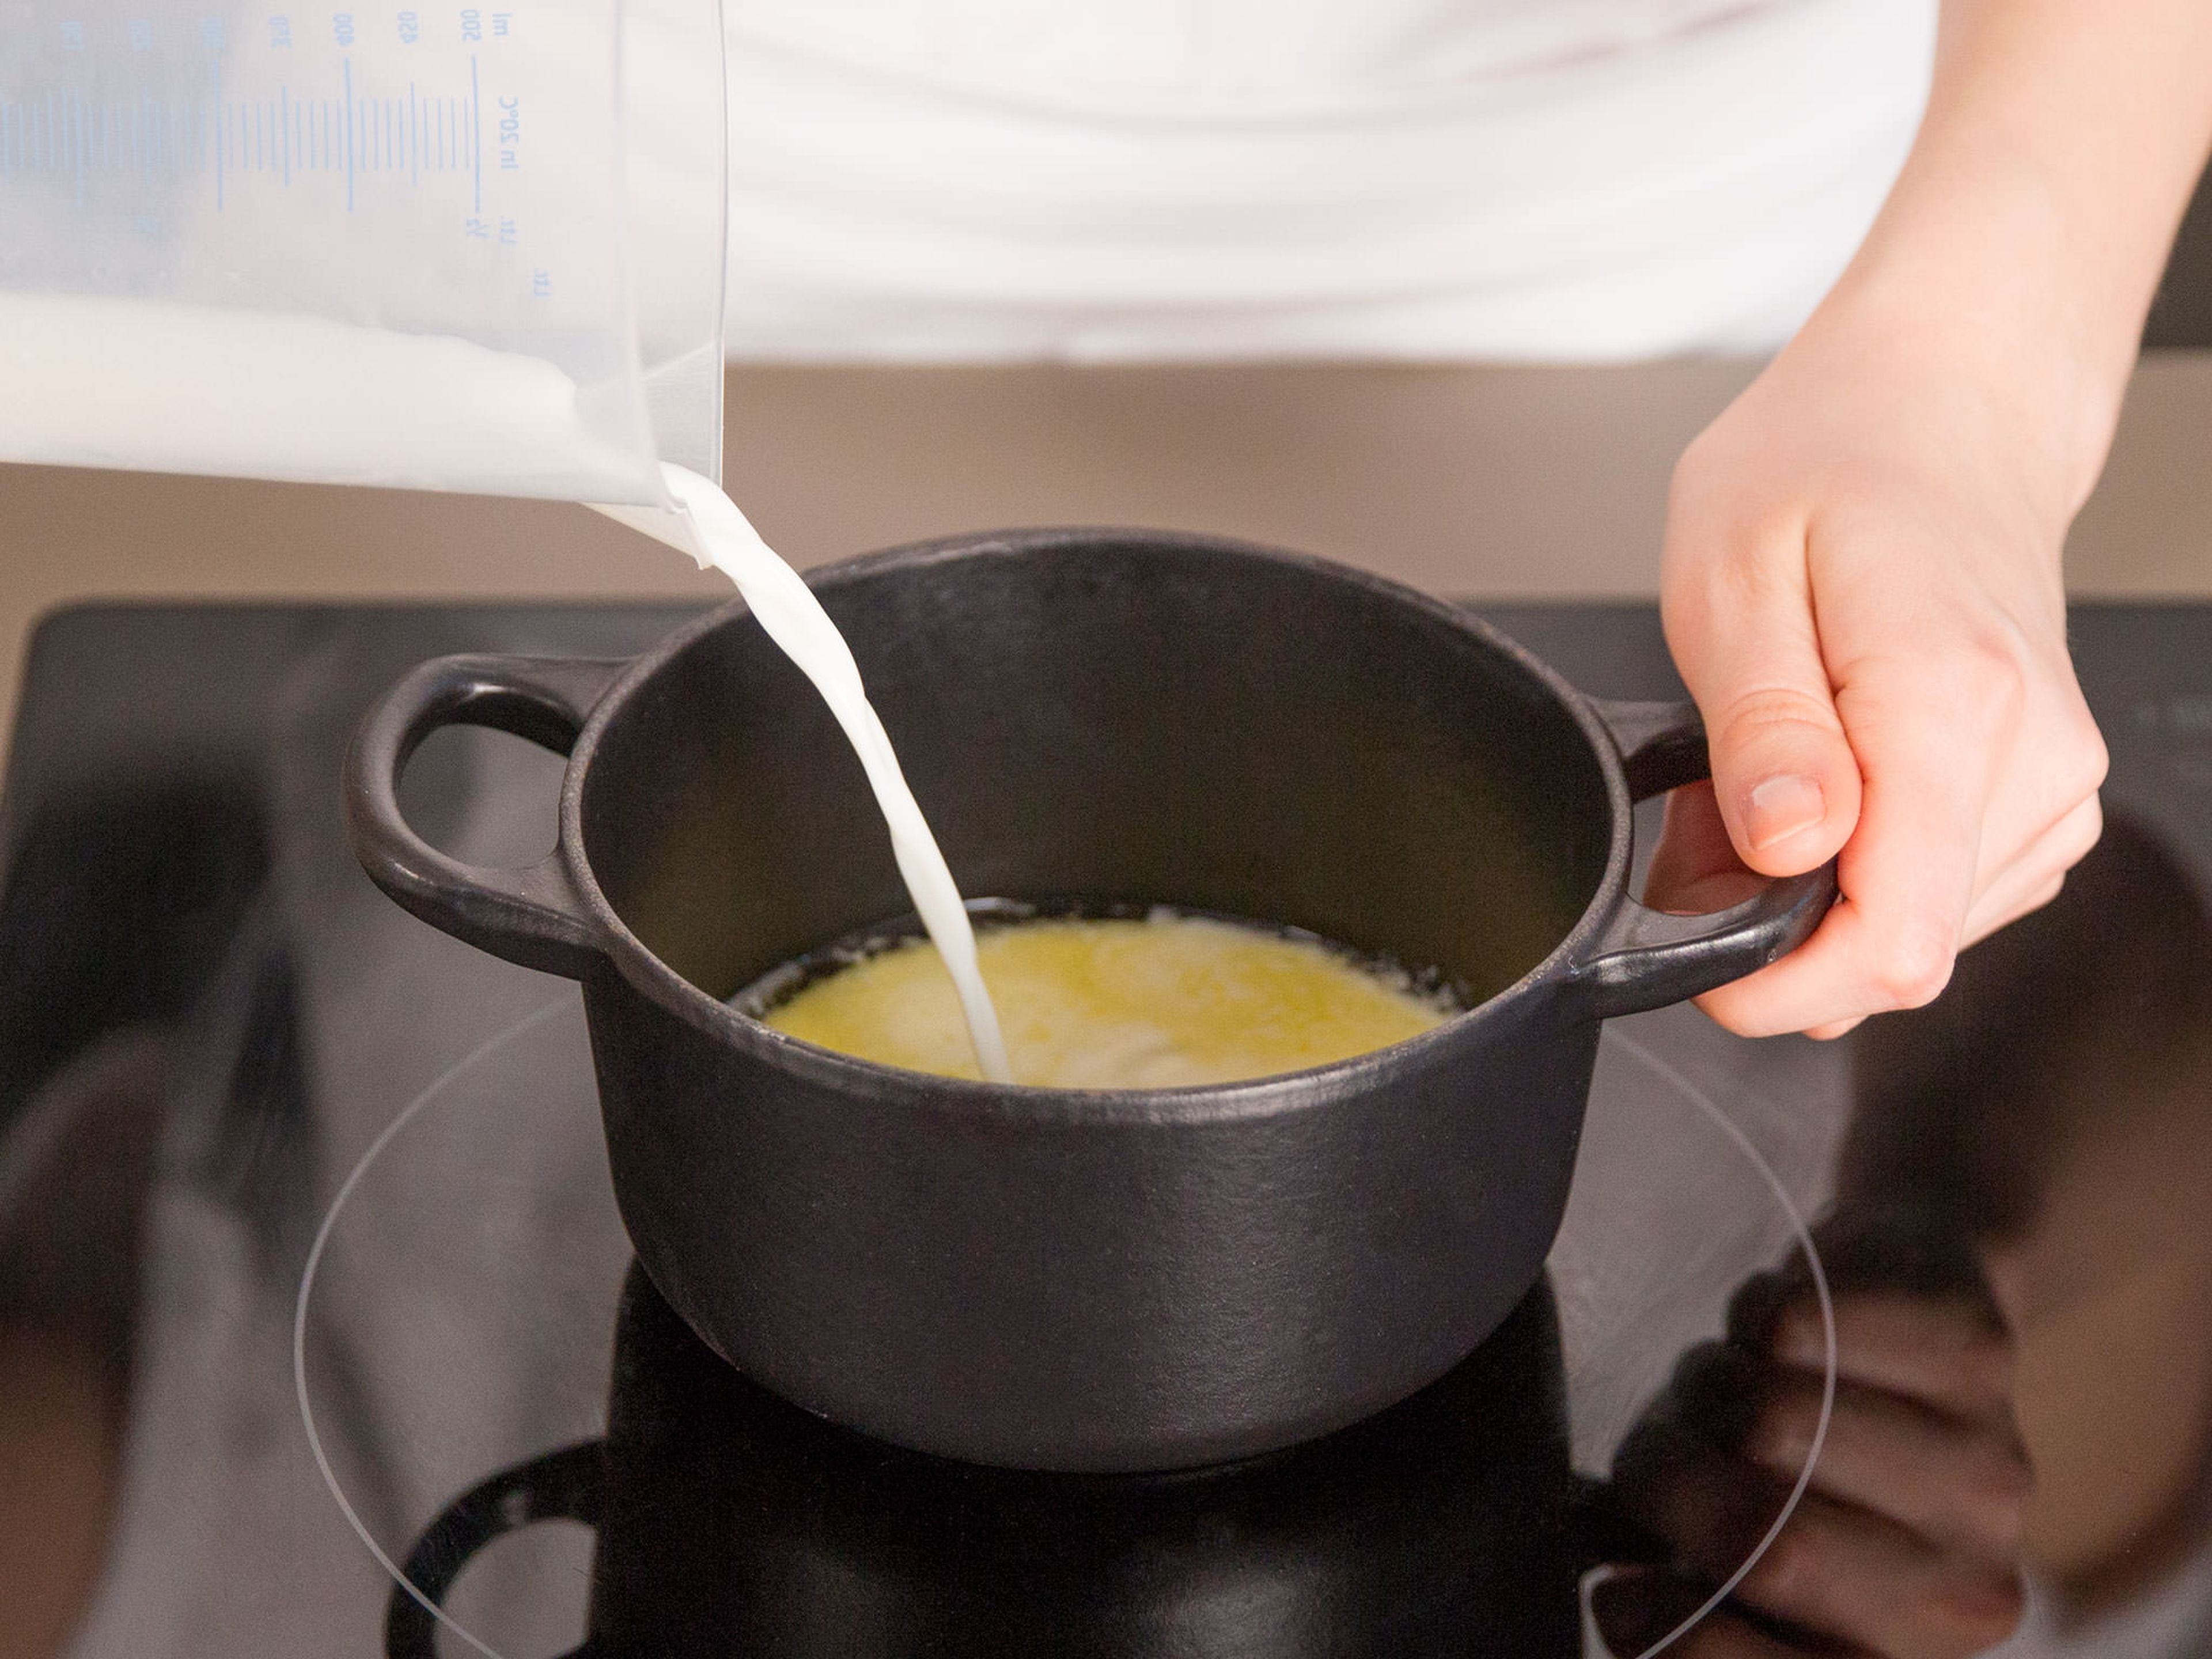 In a small saucepan, heat up butter and milk over medium-low heat.